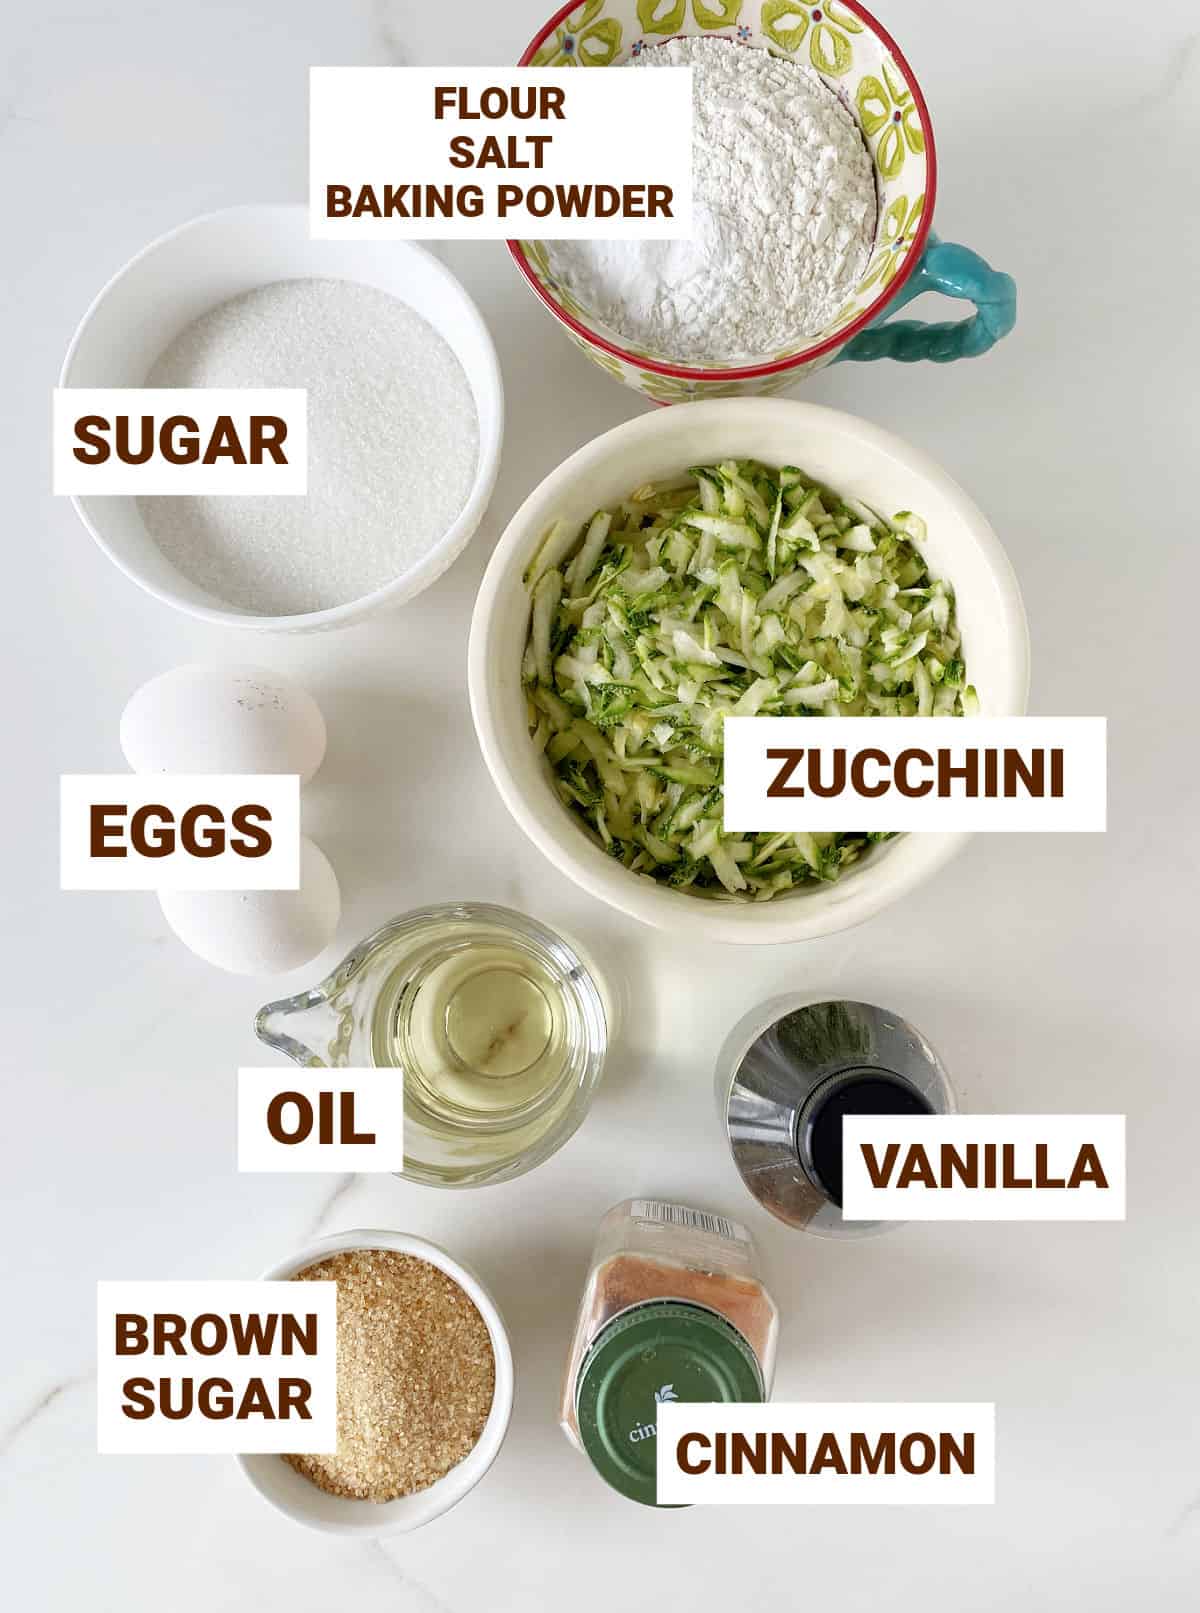 Bowls with zucchini cake ingredients on white surface, including cinnamon, vanilla, oil, brown sugar